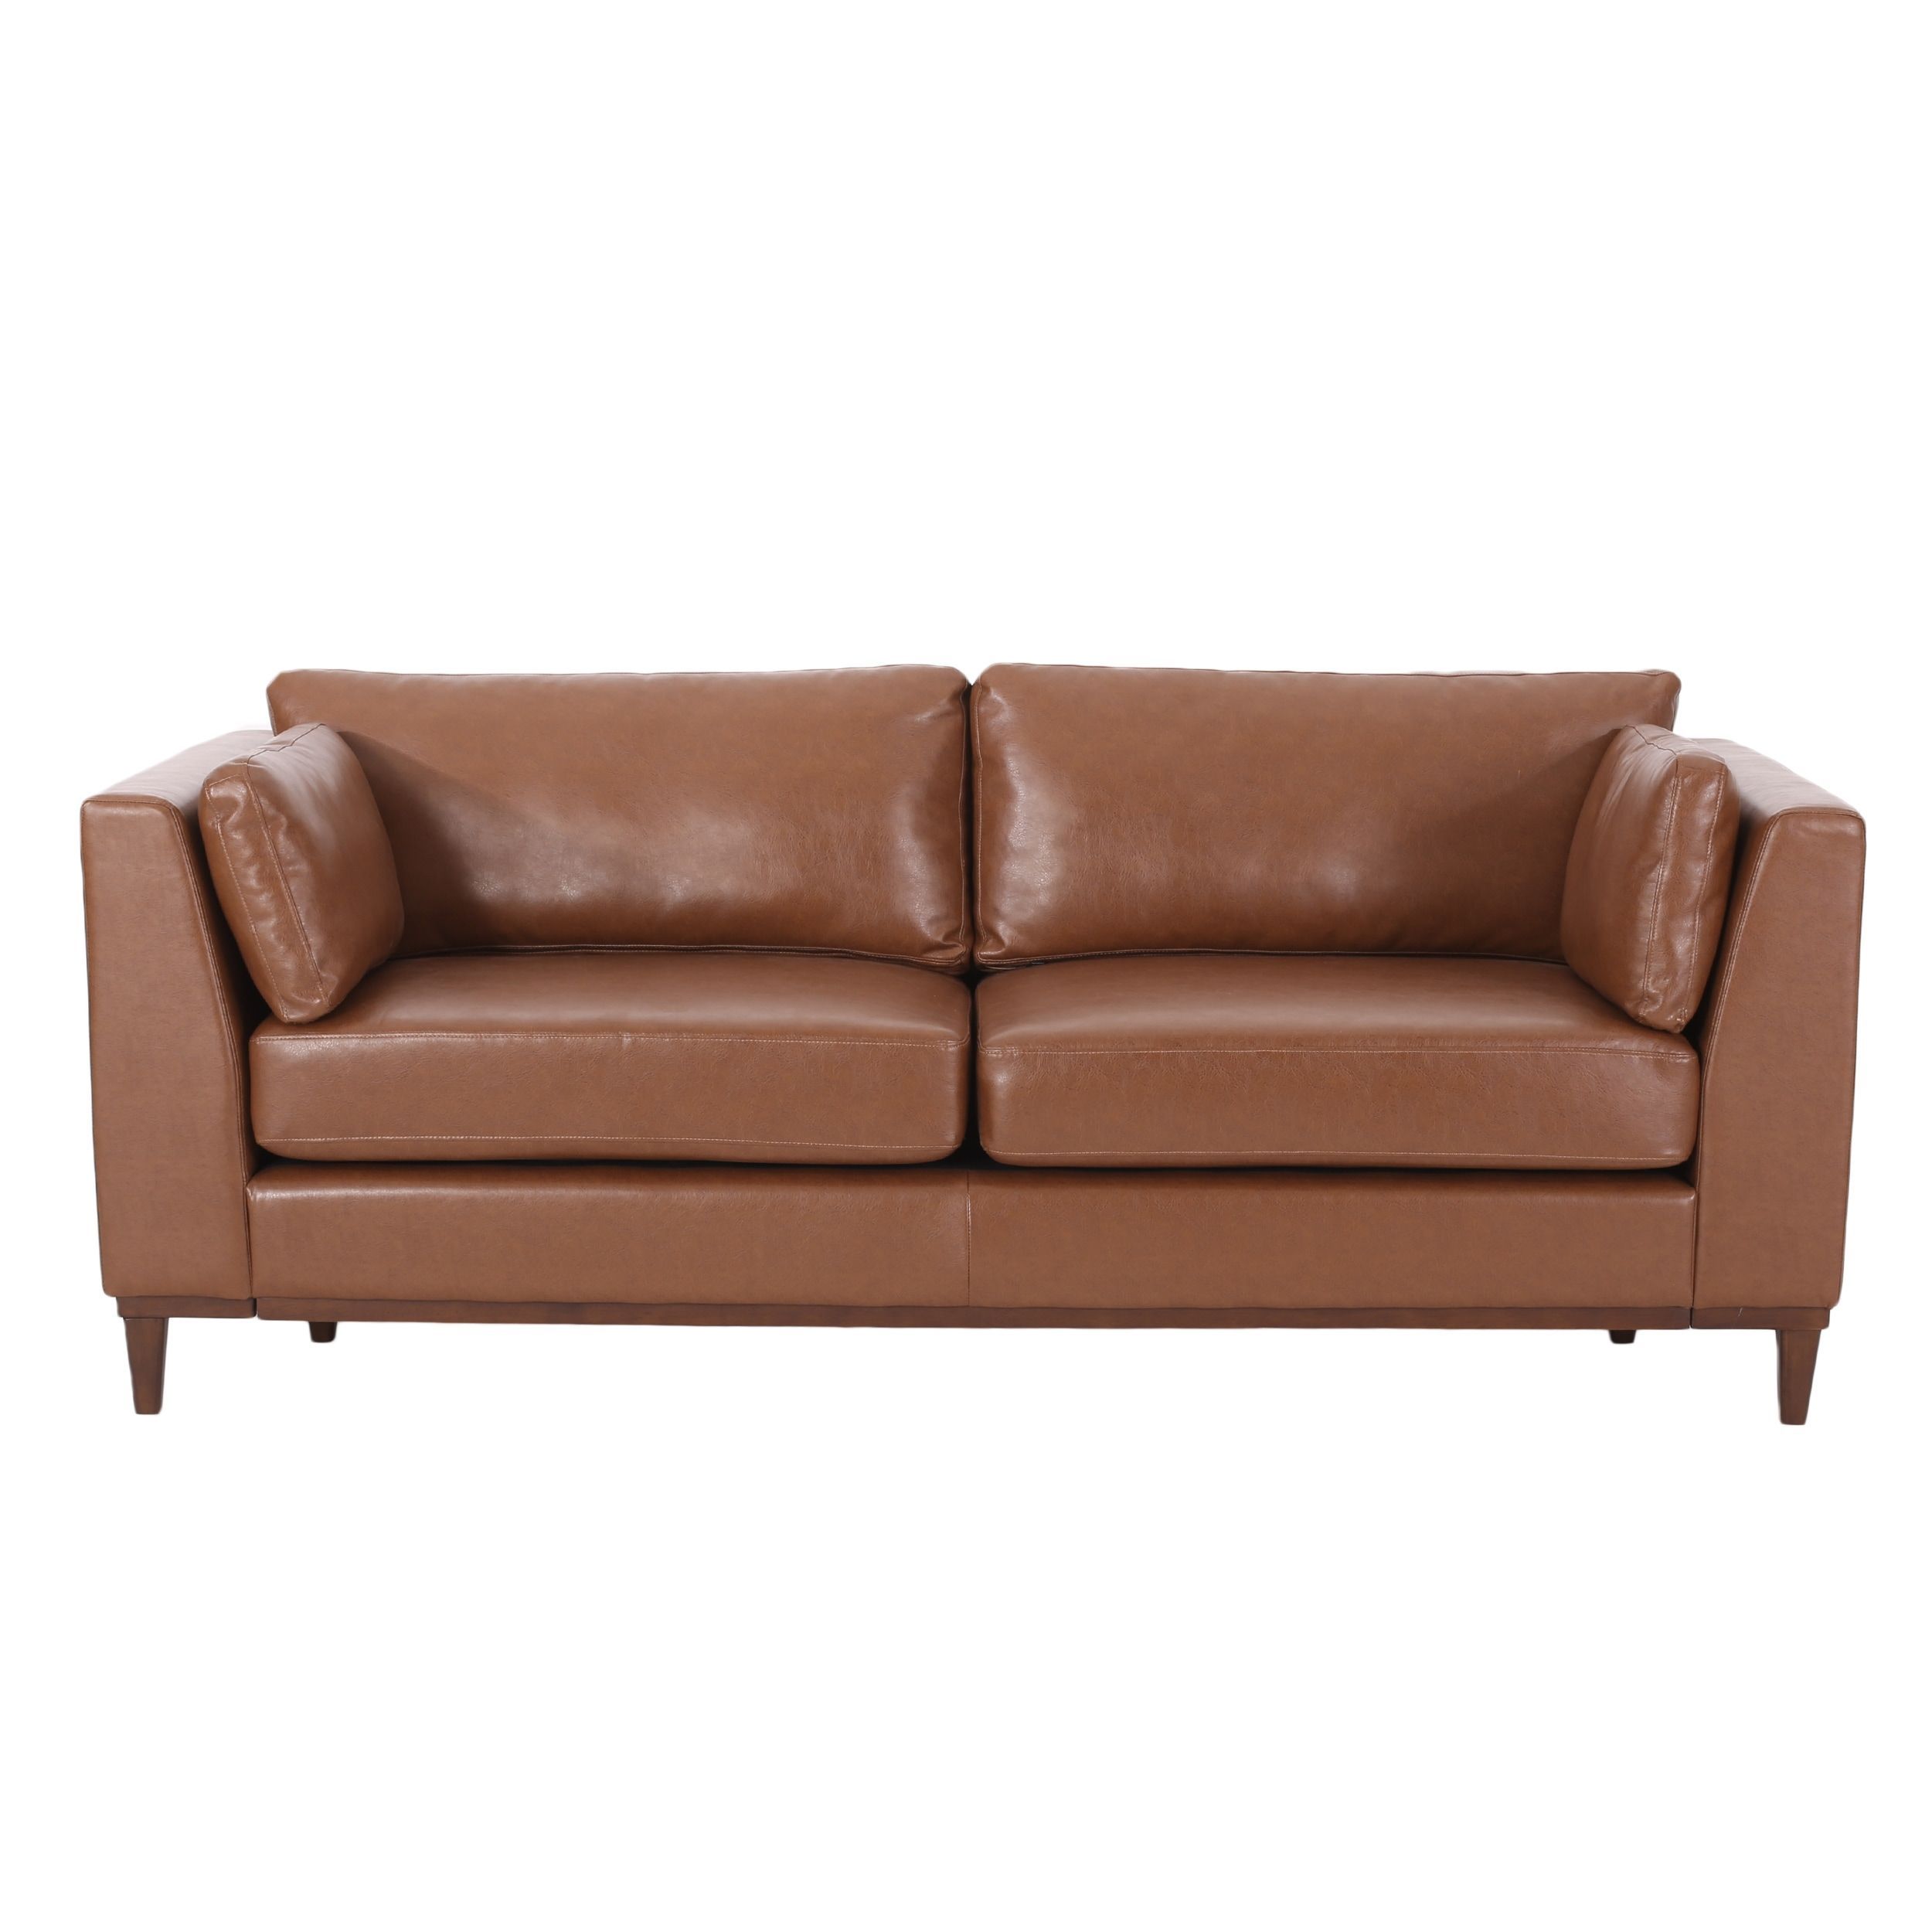 Warbler Faux Leather 3 Seater Sofachristopher Knight Home – On Sale With Traditional 3 Seater Faux Leather Sofas (Gallery 17 of 20)